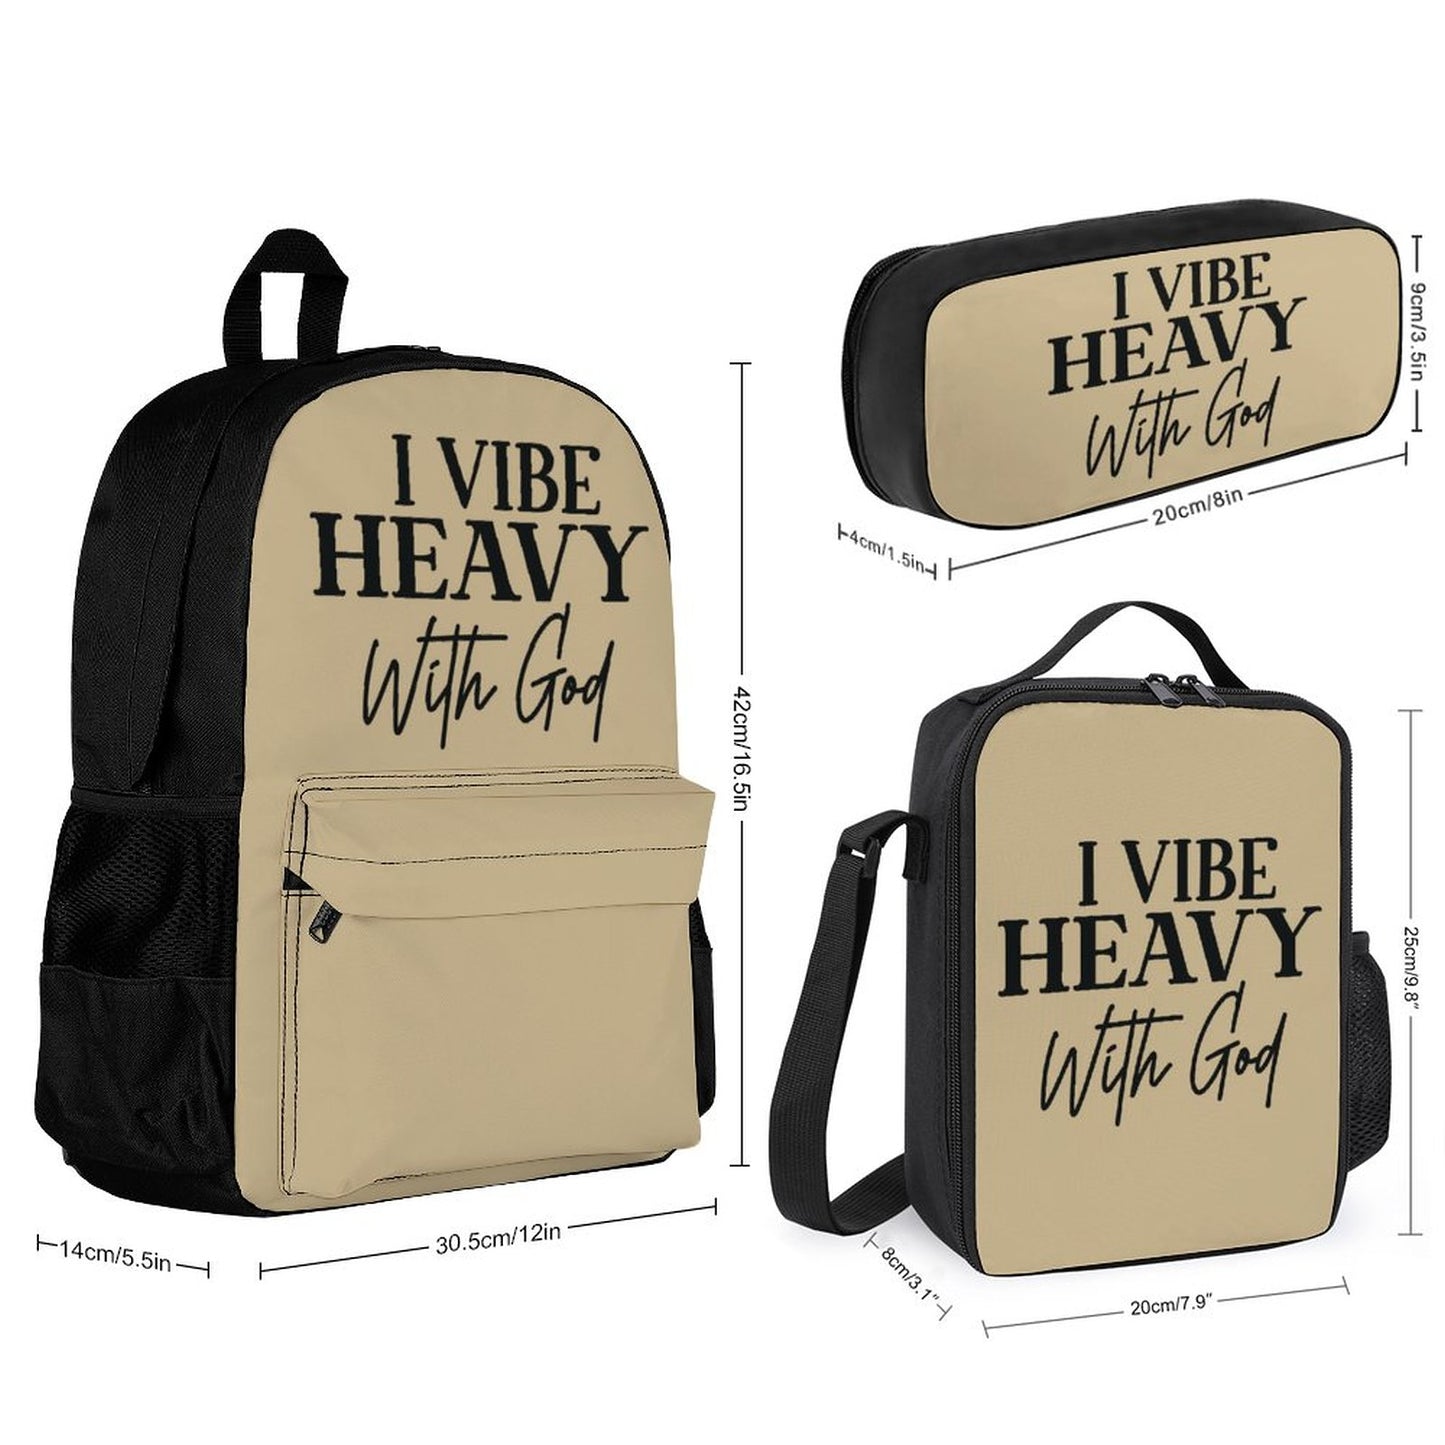 I Vibe Heavy With God Christian Backpack Set of 3 Bags (Shoulder Bag Lunch Bag & Pencil Pouch)